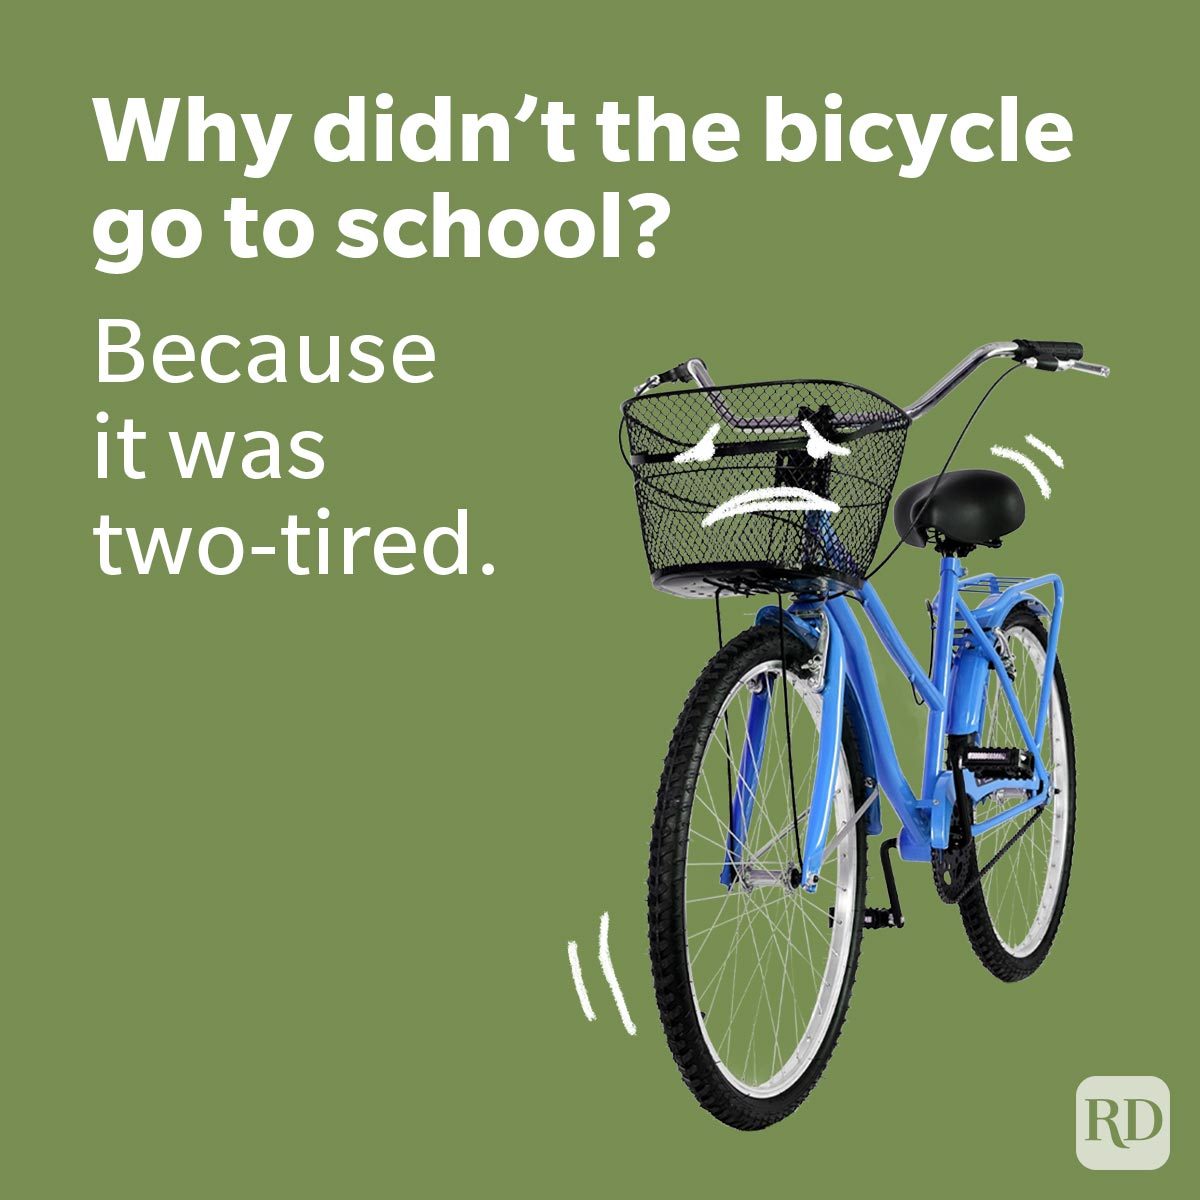 School Jokes That Won't Land You In Detention blue cycle with basket feeling weary and with tired expressions on green background